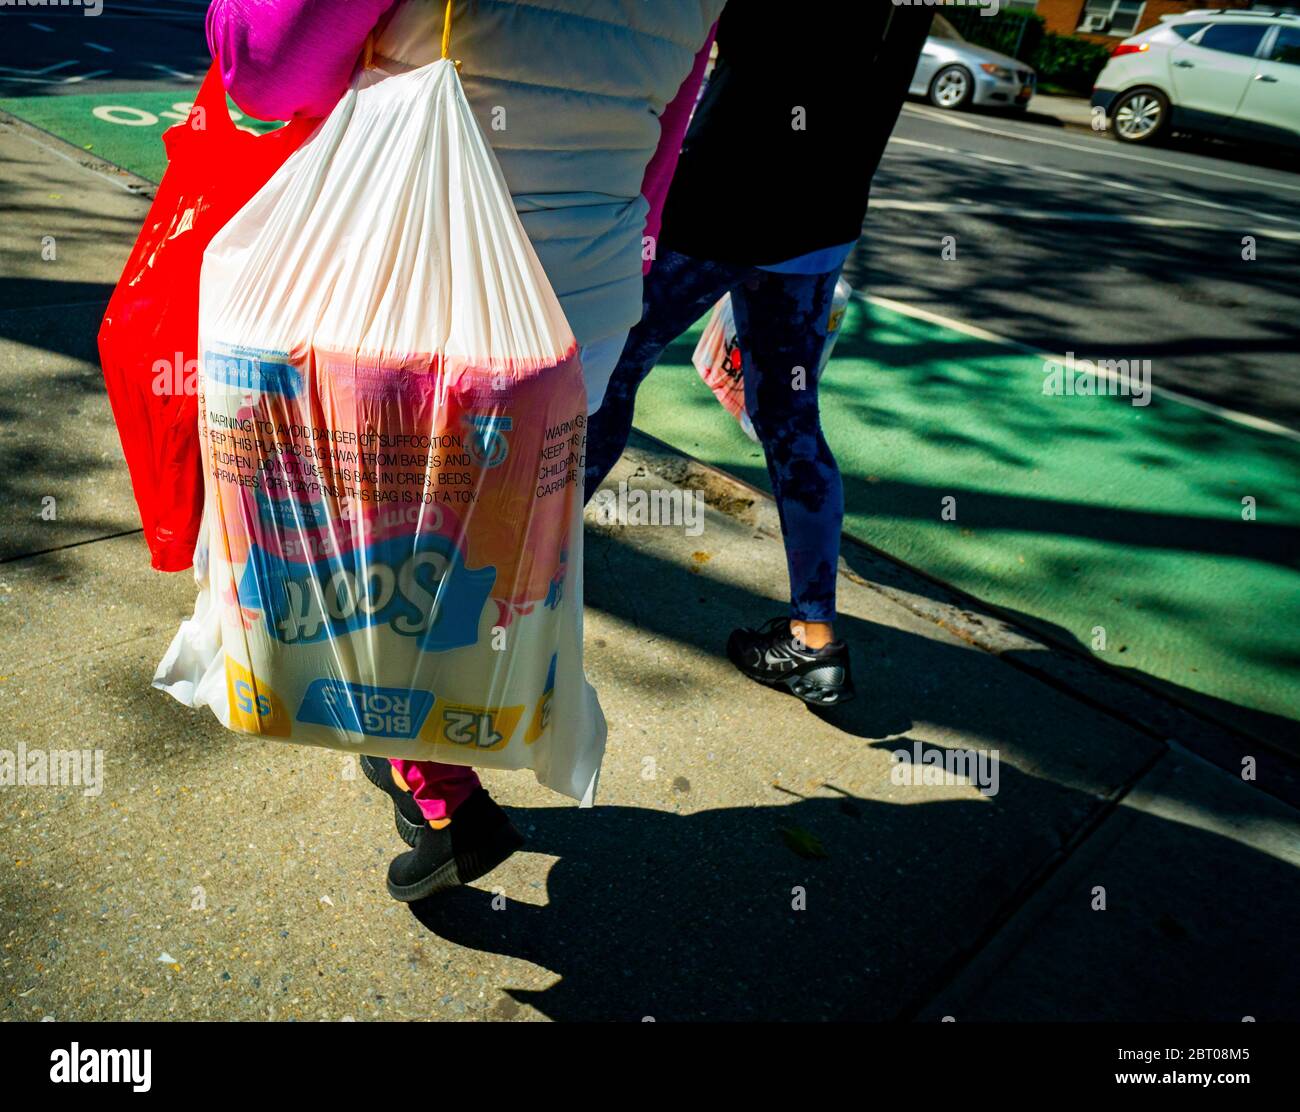 Shoppers with their supply of toilet paper in Chelsea in New York on Thursday, May 14, 2020. (© Richard B. Levine) Stock Photo